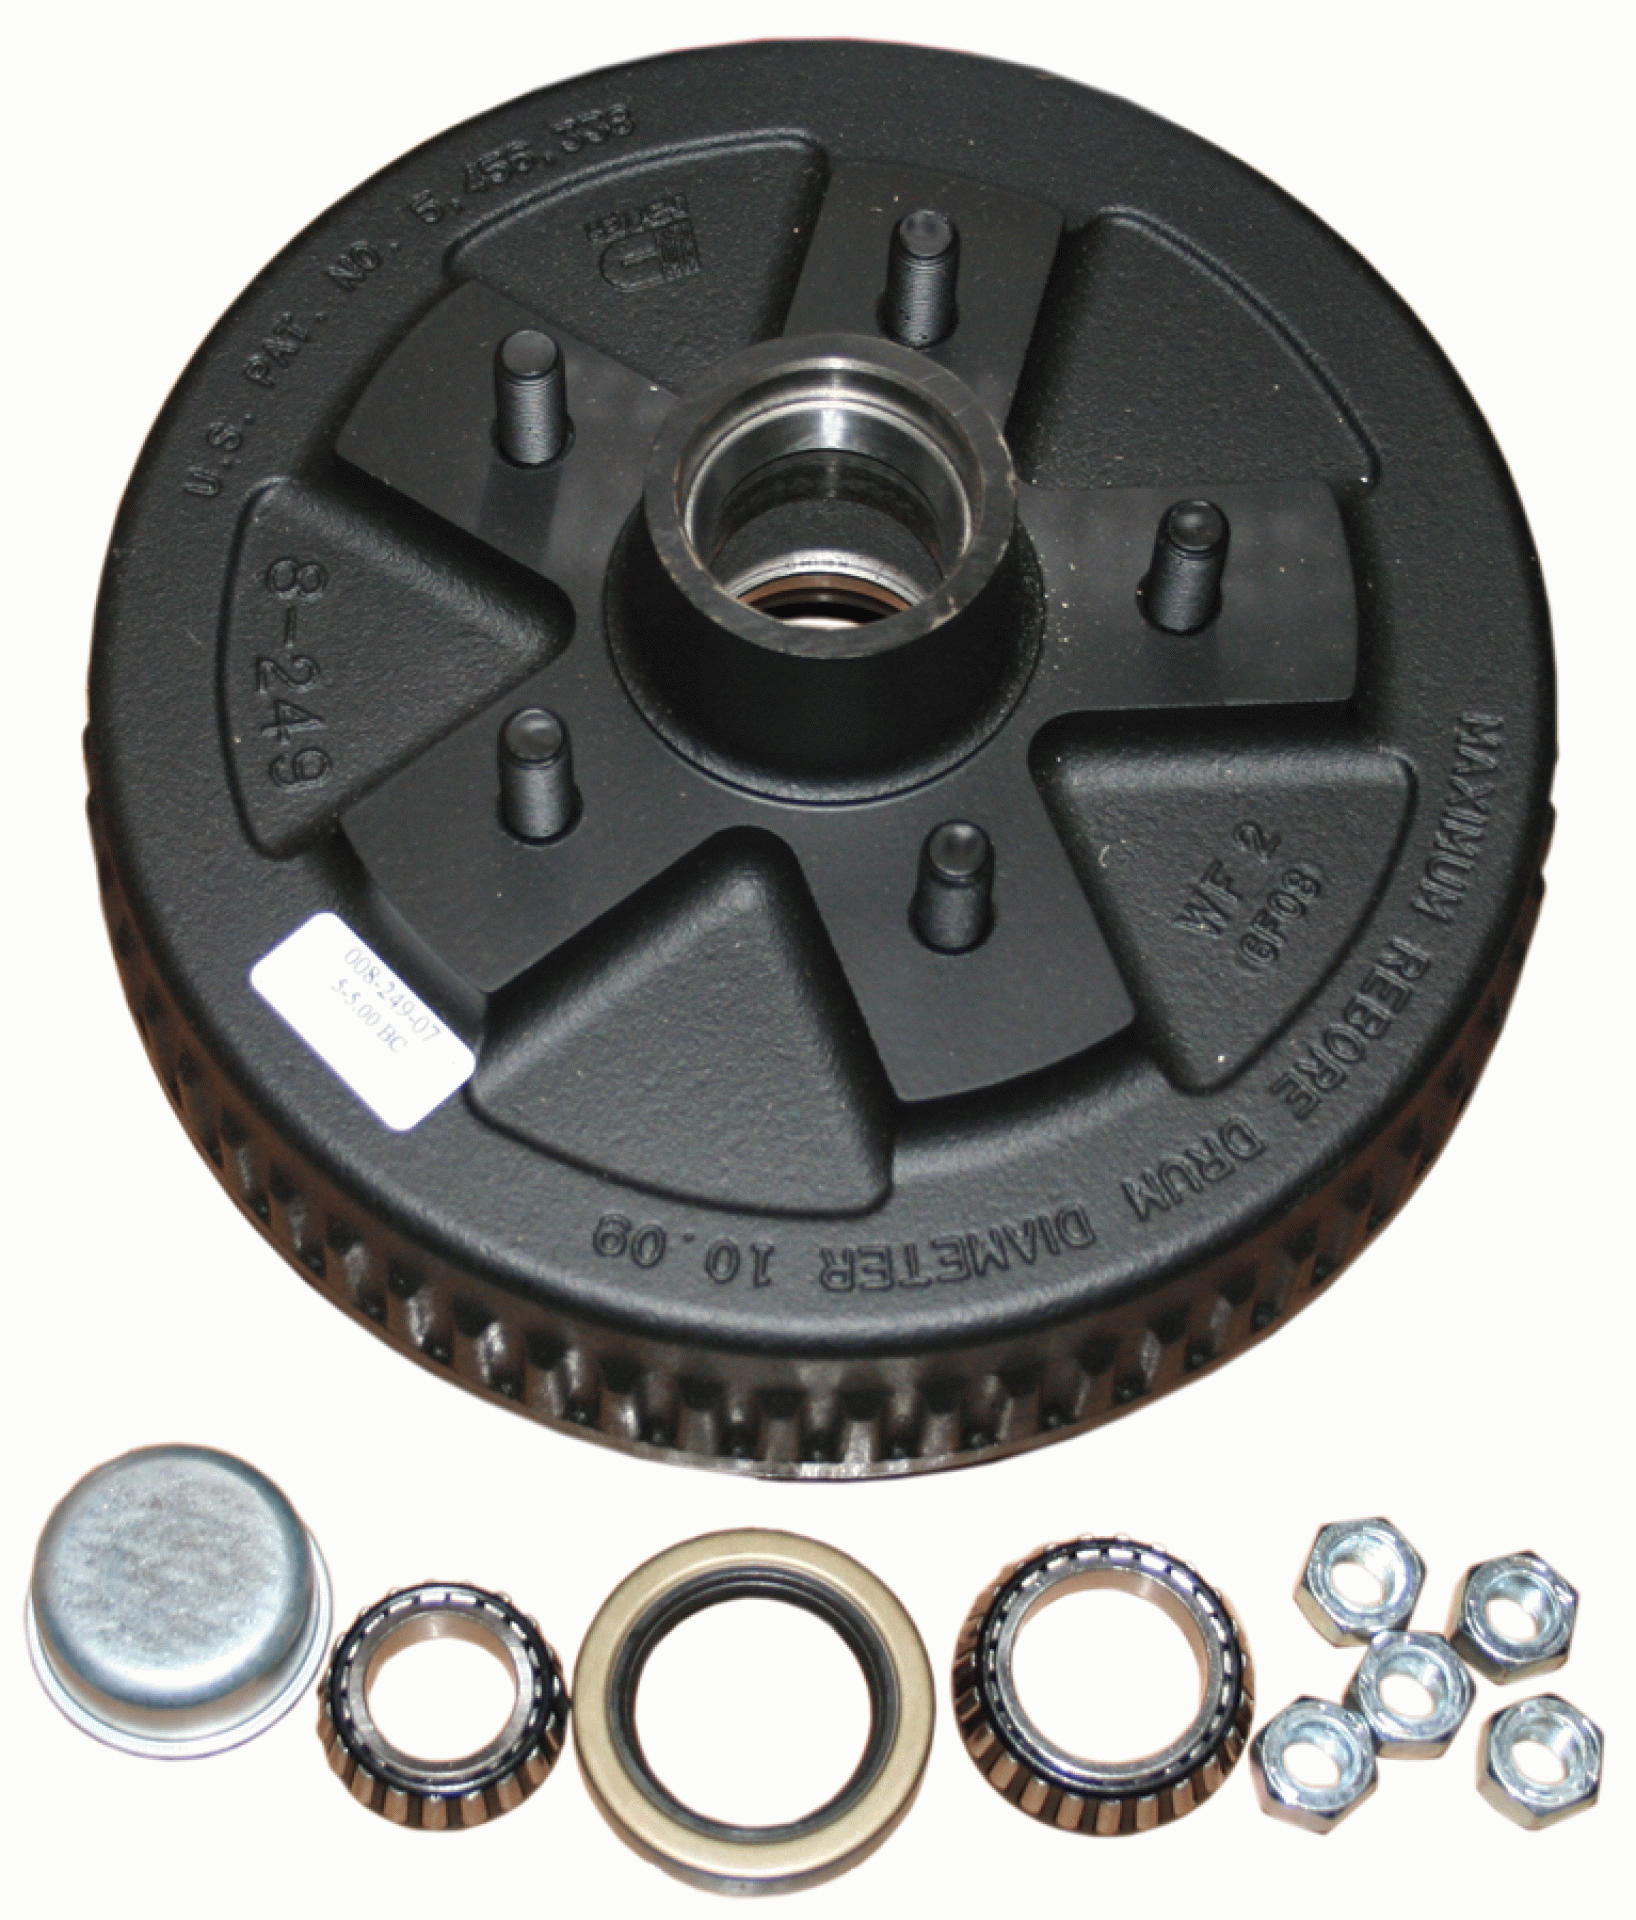 DEXTER AXLE CO. | K08-249-90 | HUB AND DRUM - 10" X 2-1/4" ELECTRIC BRAKES - 5-1/2" BOLT CIRCLE